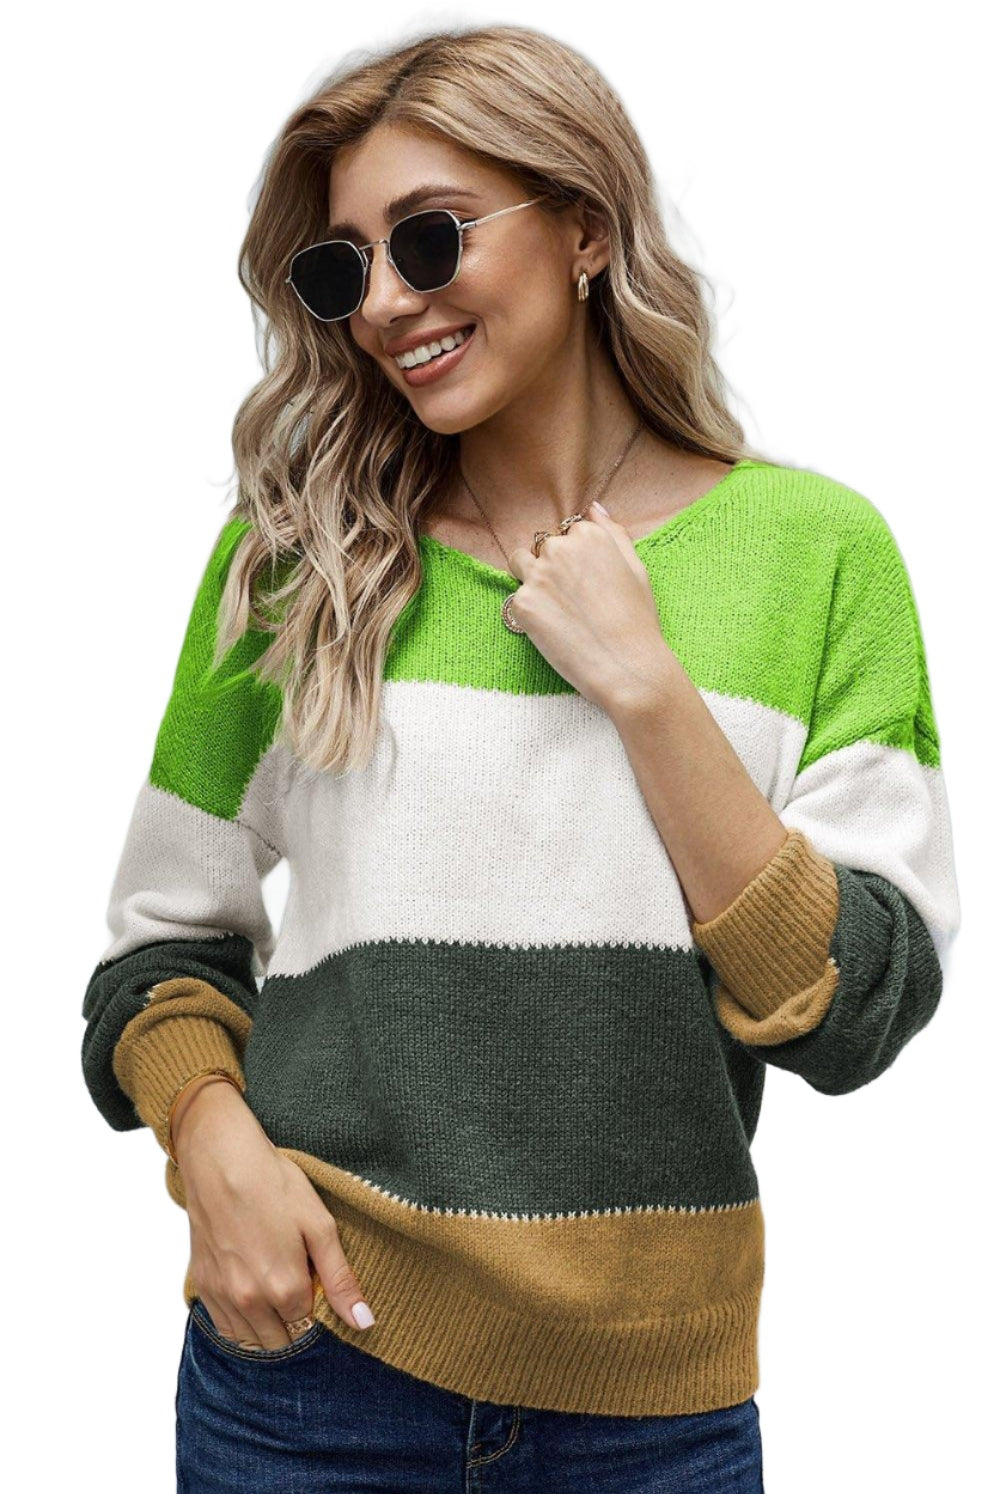 Women's Sweaters Winter Green Pullover Colorblock Sweater